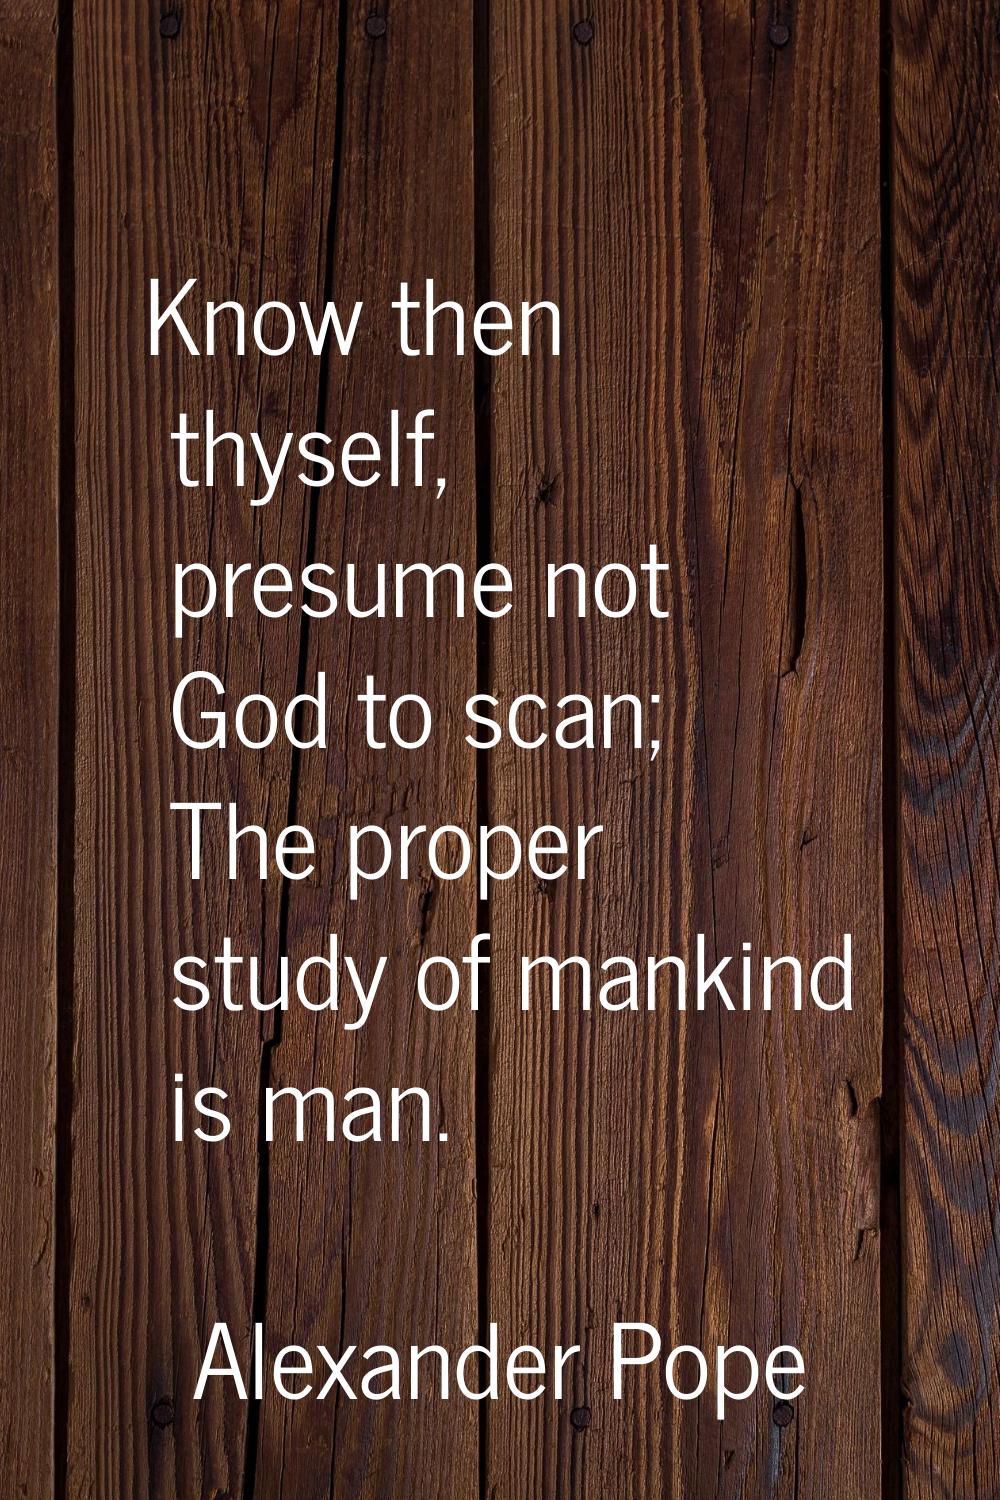 Know then thyself, presume not God to scan; The proper study of mankind is man.